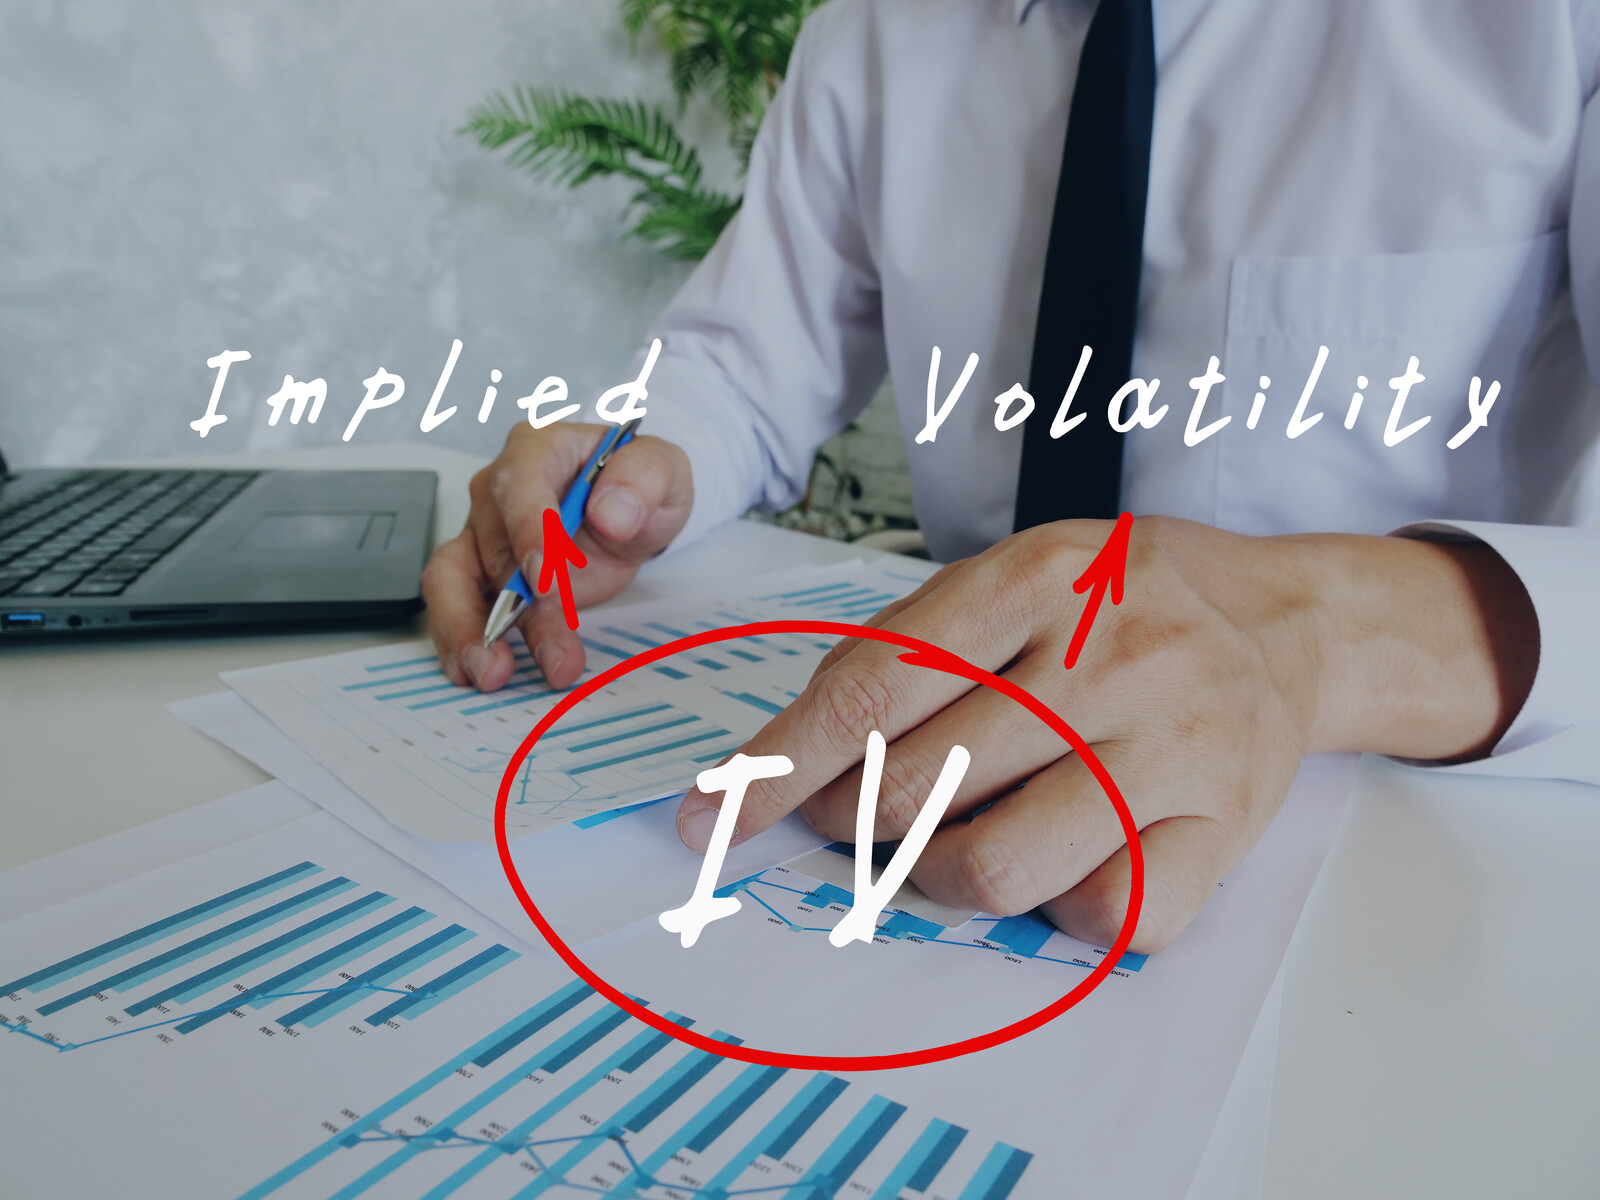 implied-volatility-and-its-affect-options-trading